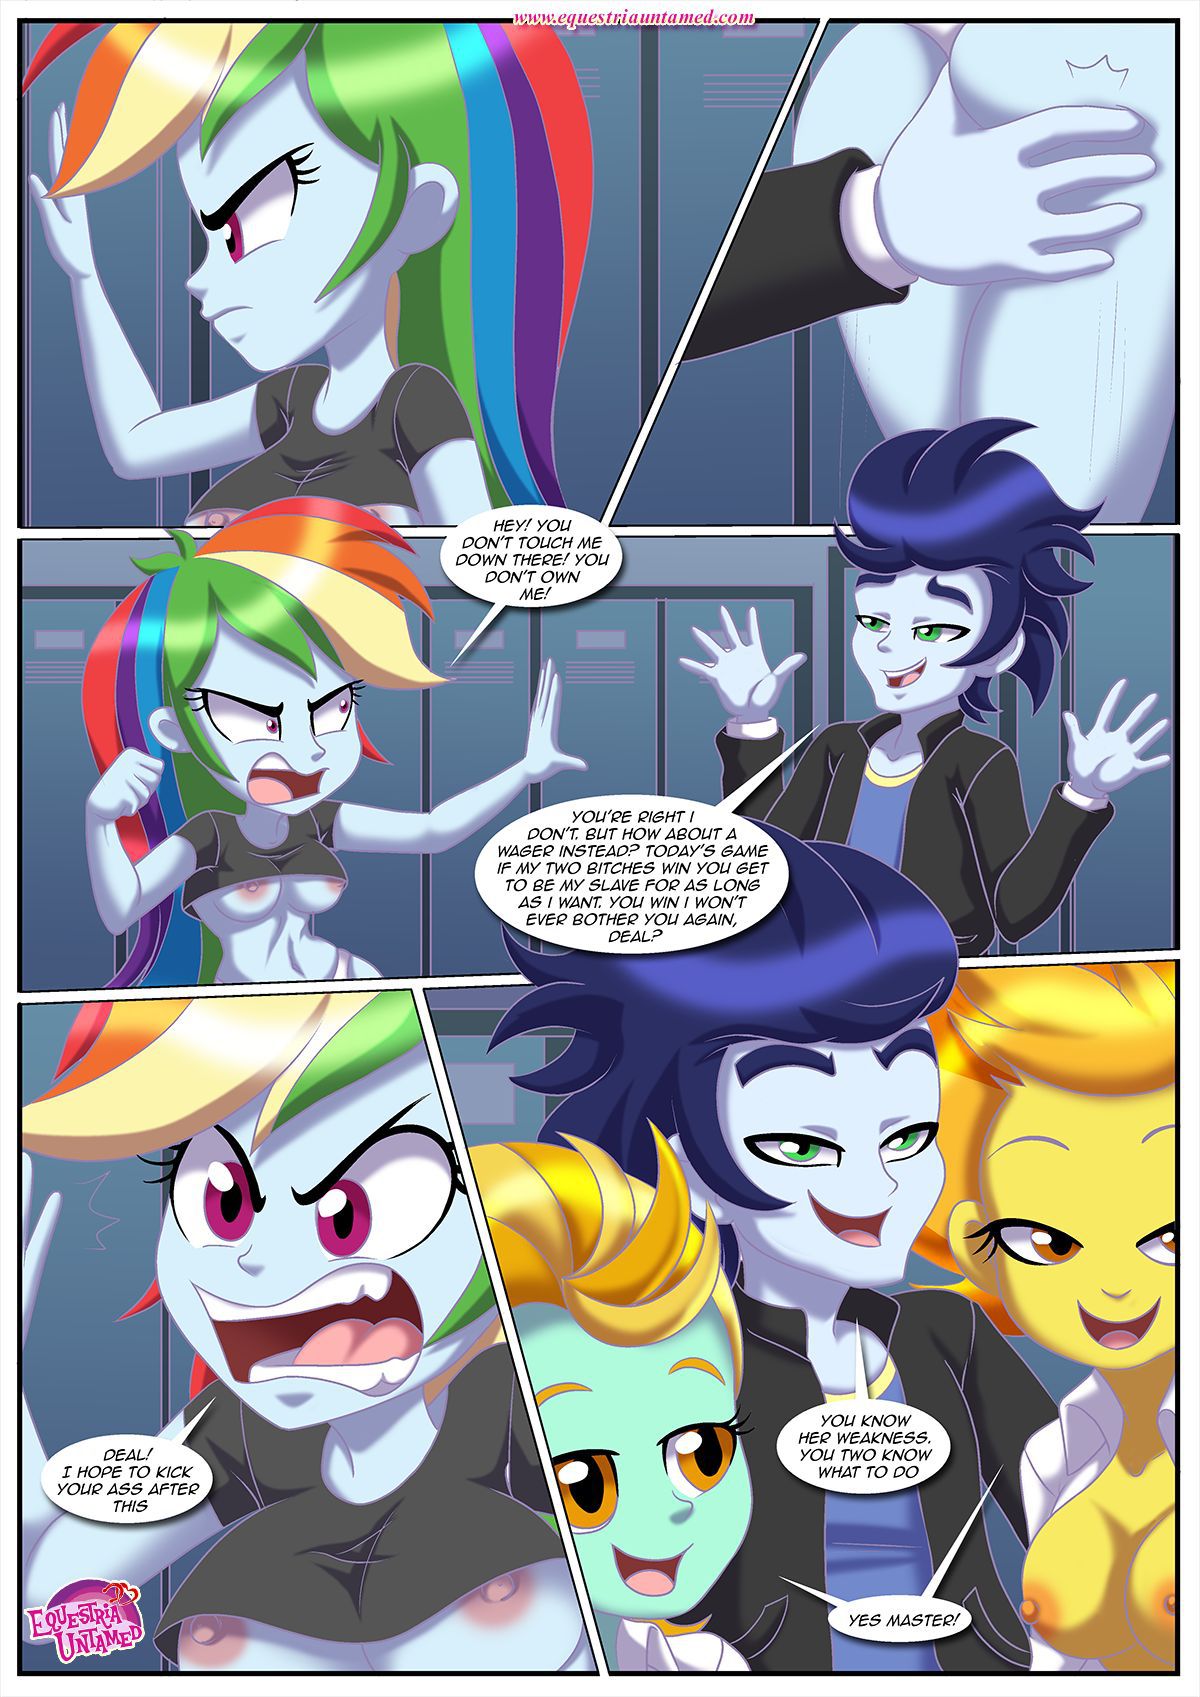 [Palcomix] Sex Reeducation | (My Little Pony: Friendship is Magic) (Ongoing) (English) 4